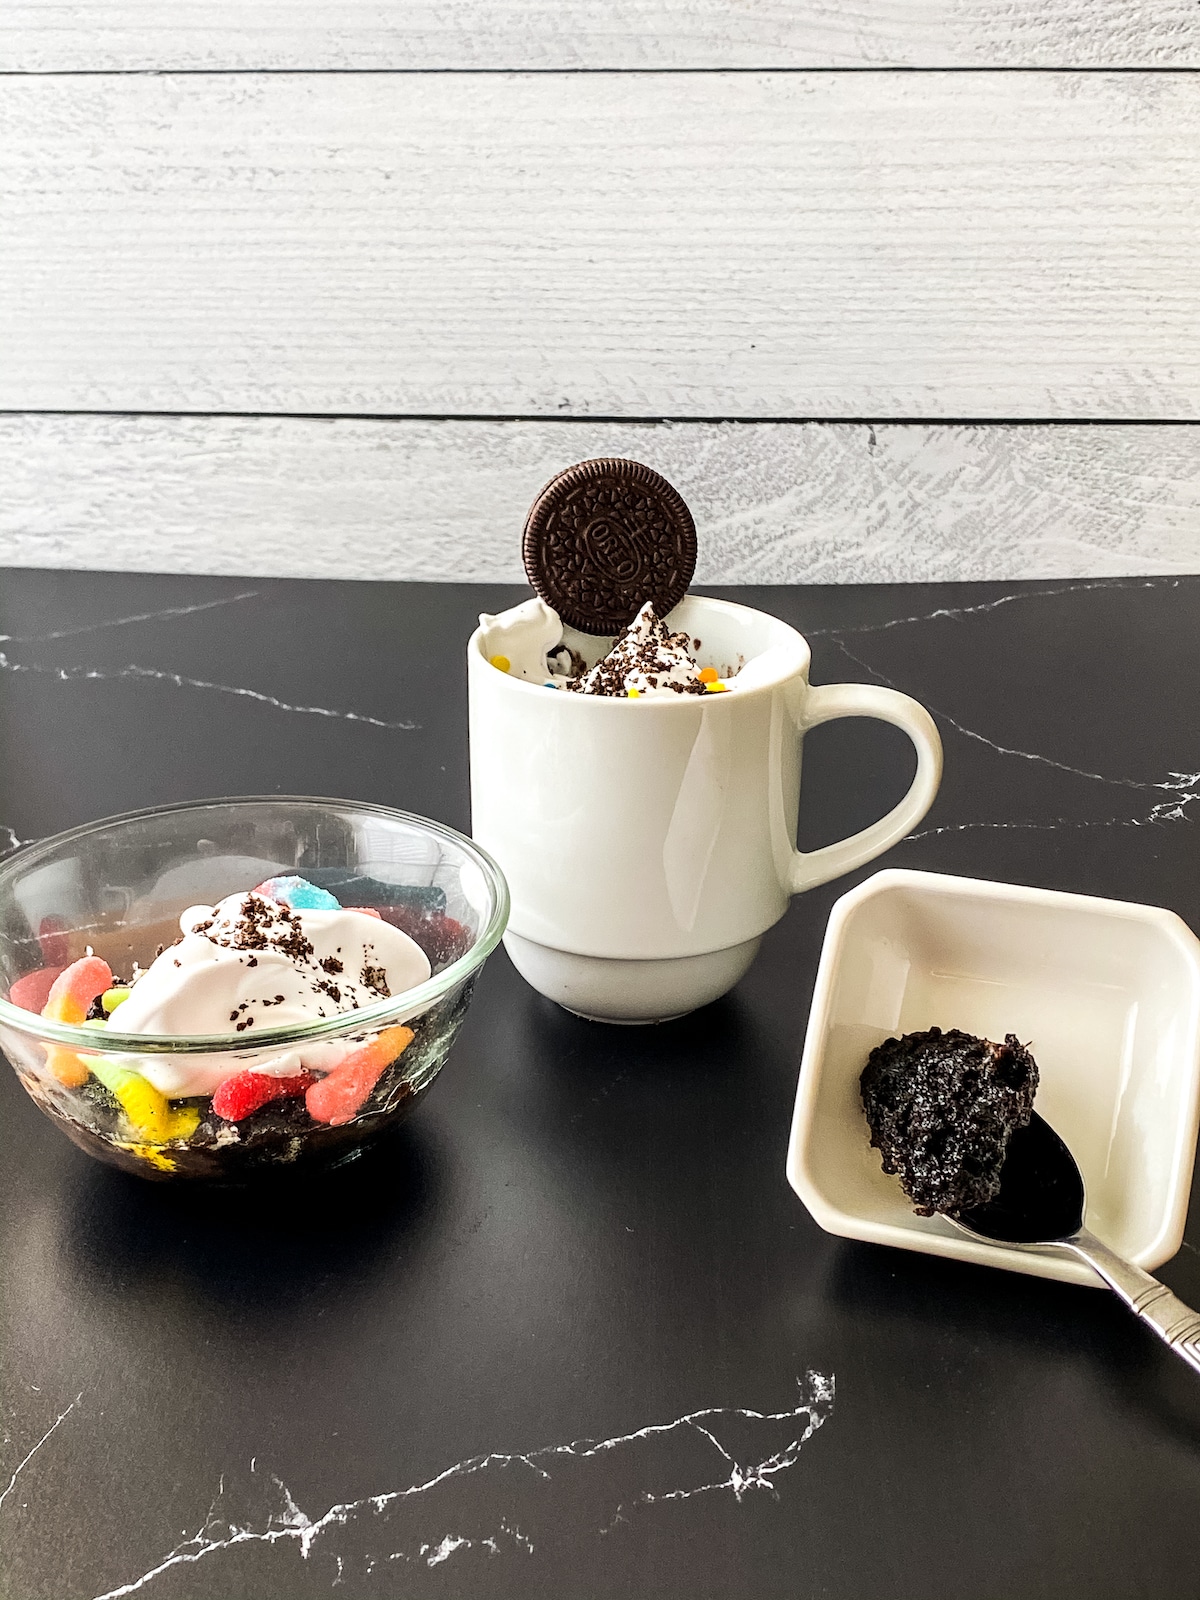 OREO cake cup on black table